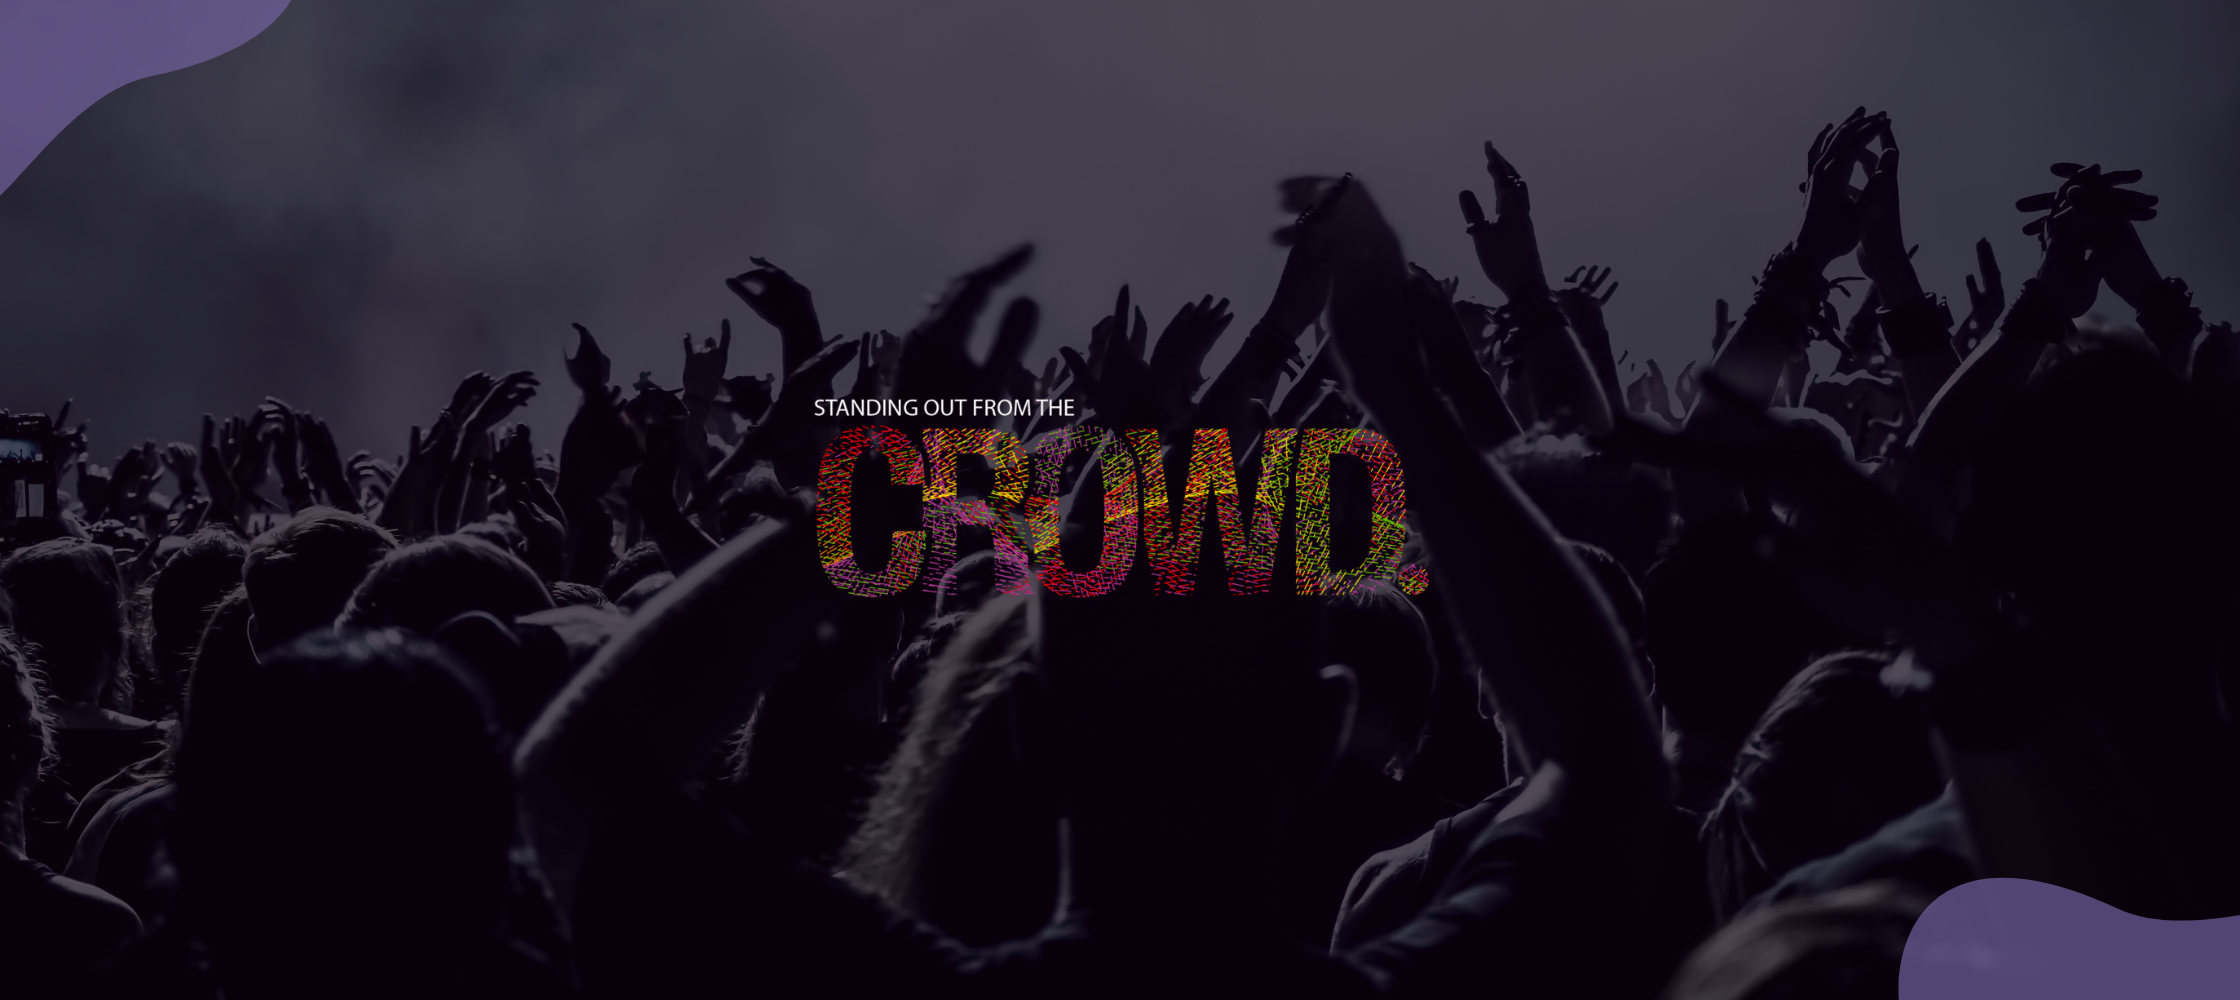 Crowd Pte Ltd logo on top of an image of a large group of people cheering